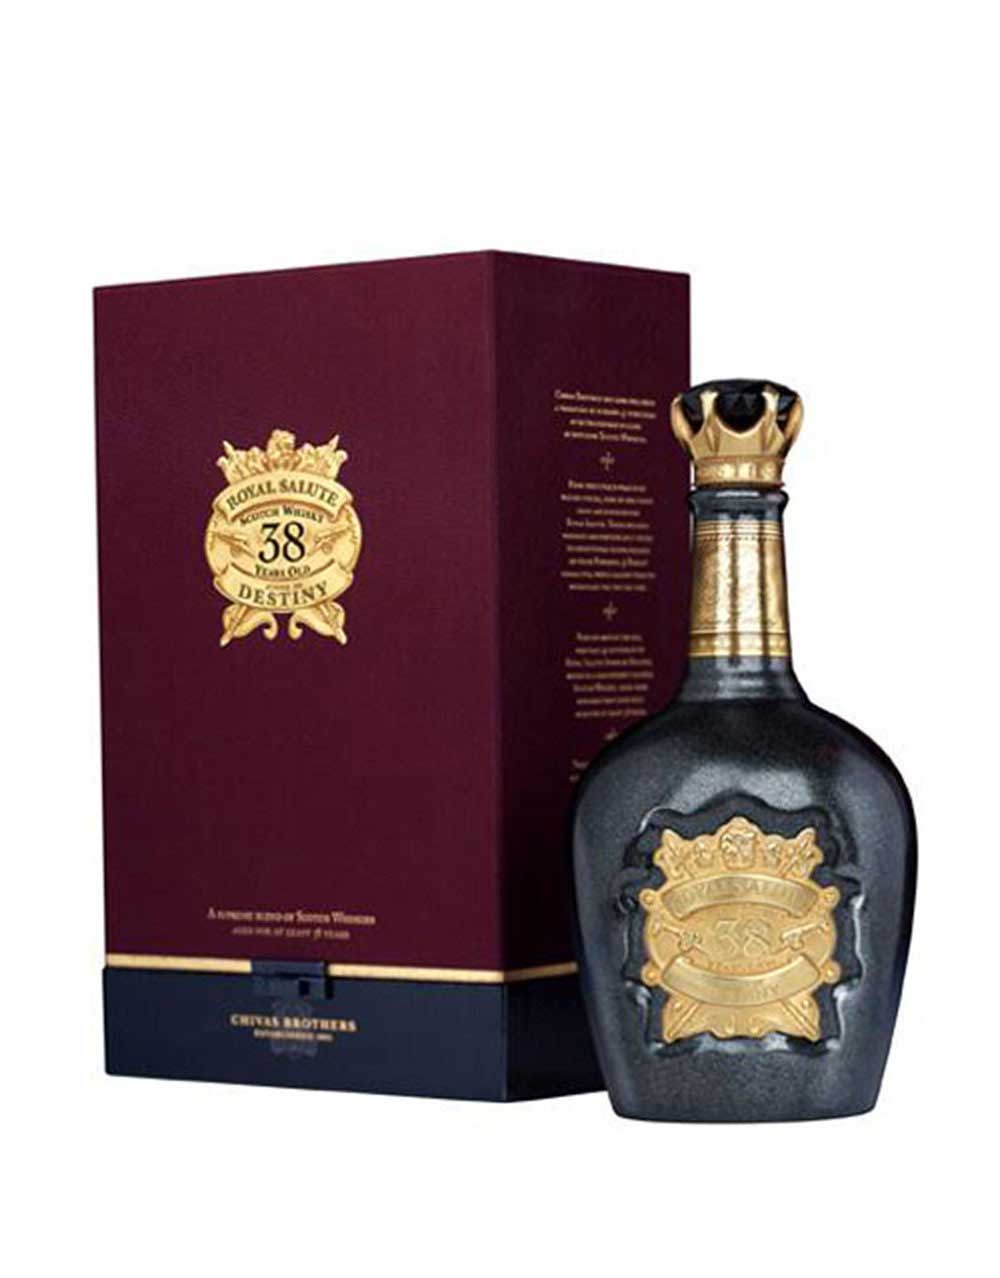 Royal Salute 38 Year Old - Stone of Destiny Whisky